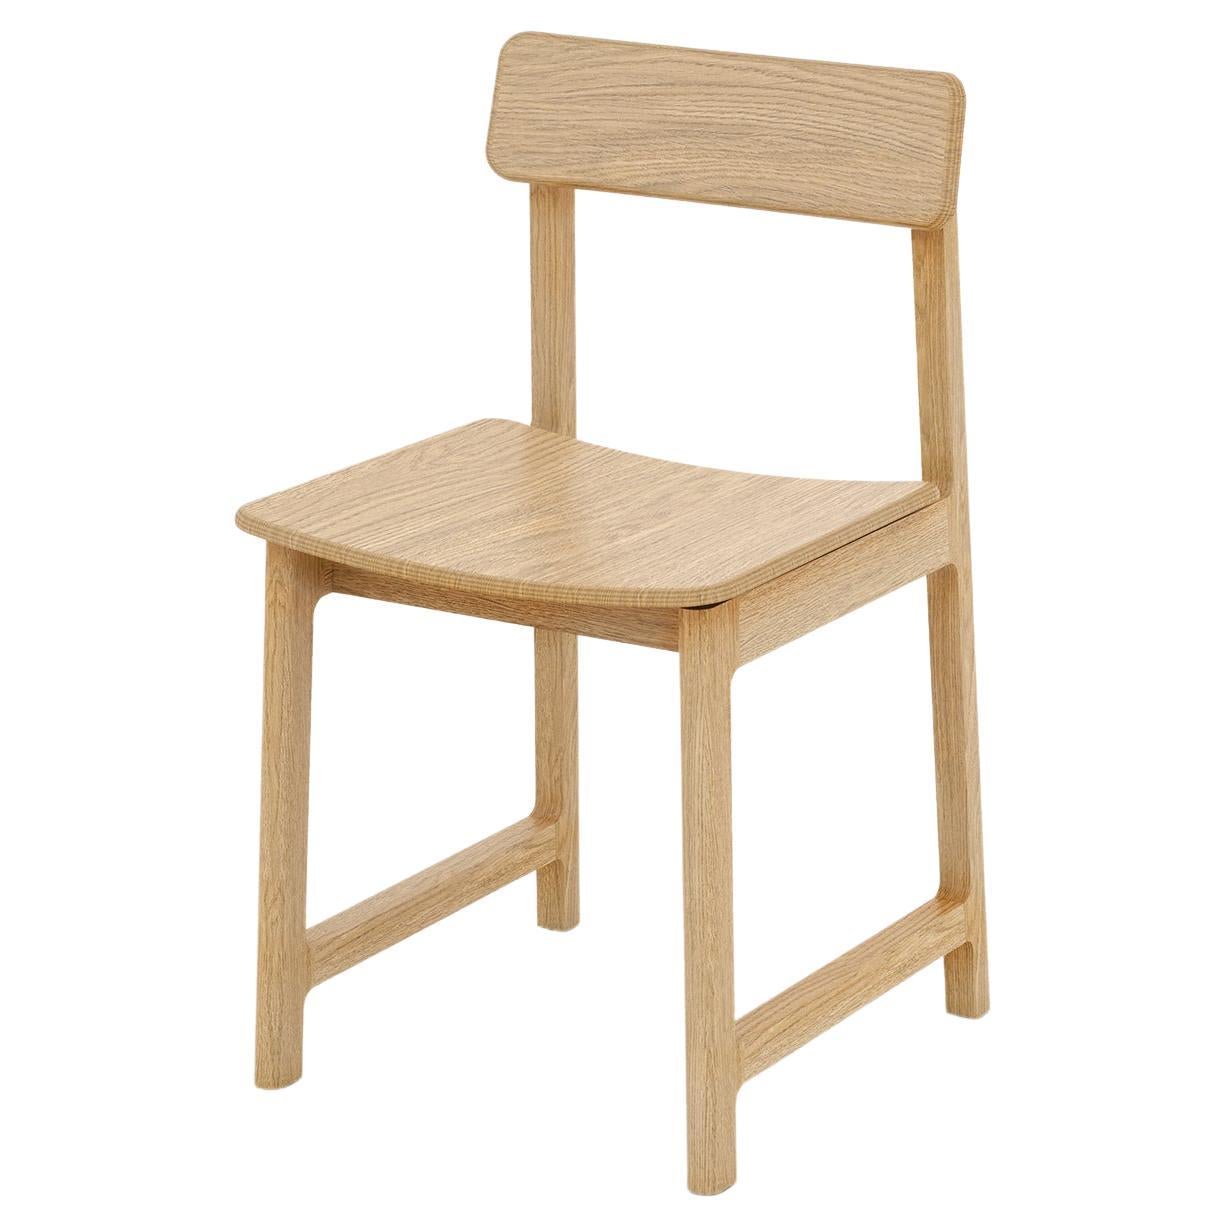 Minimalist Modern Chair in Oak Wood Frame Collection